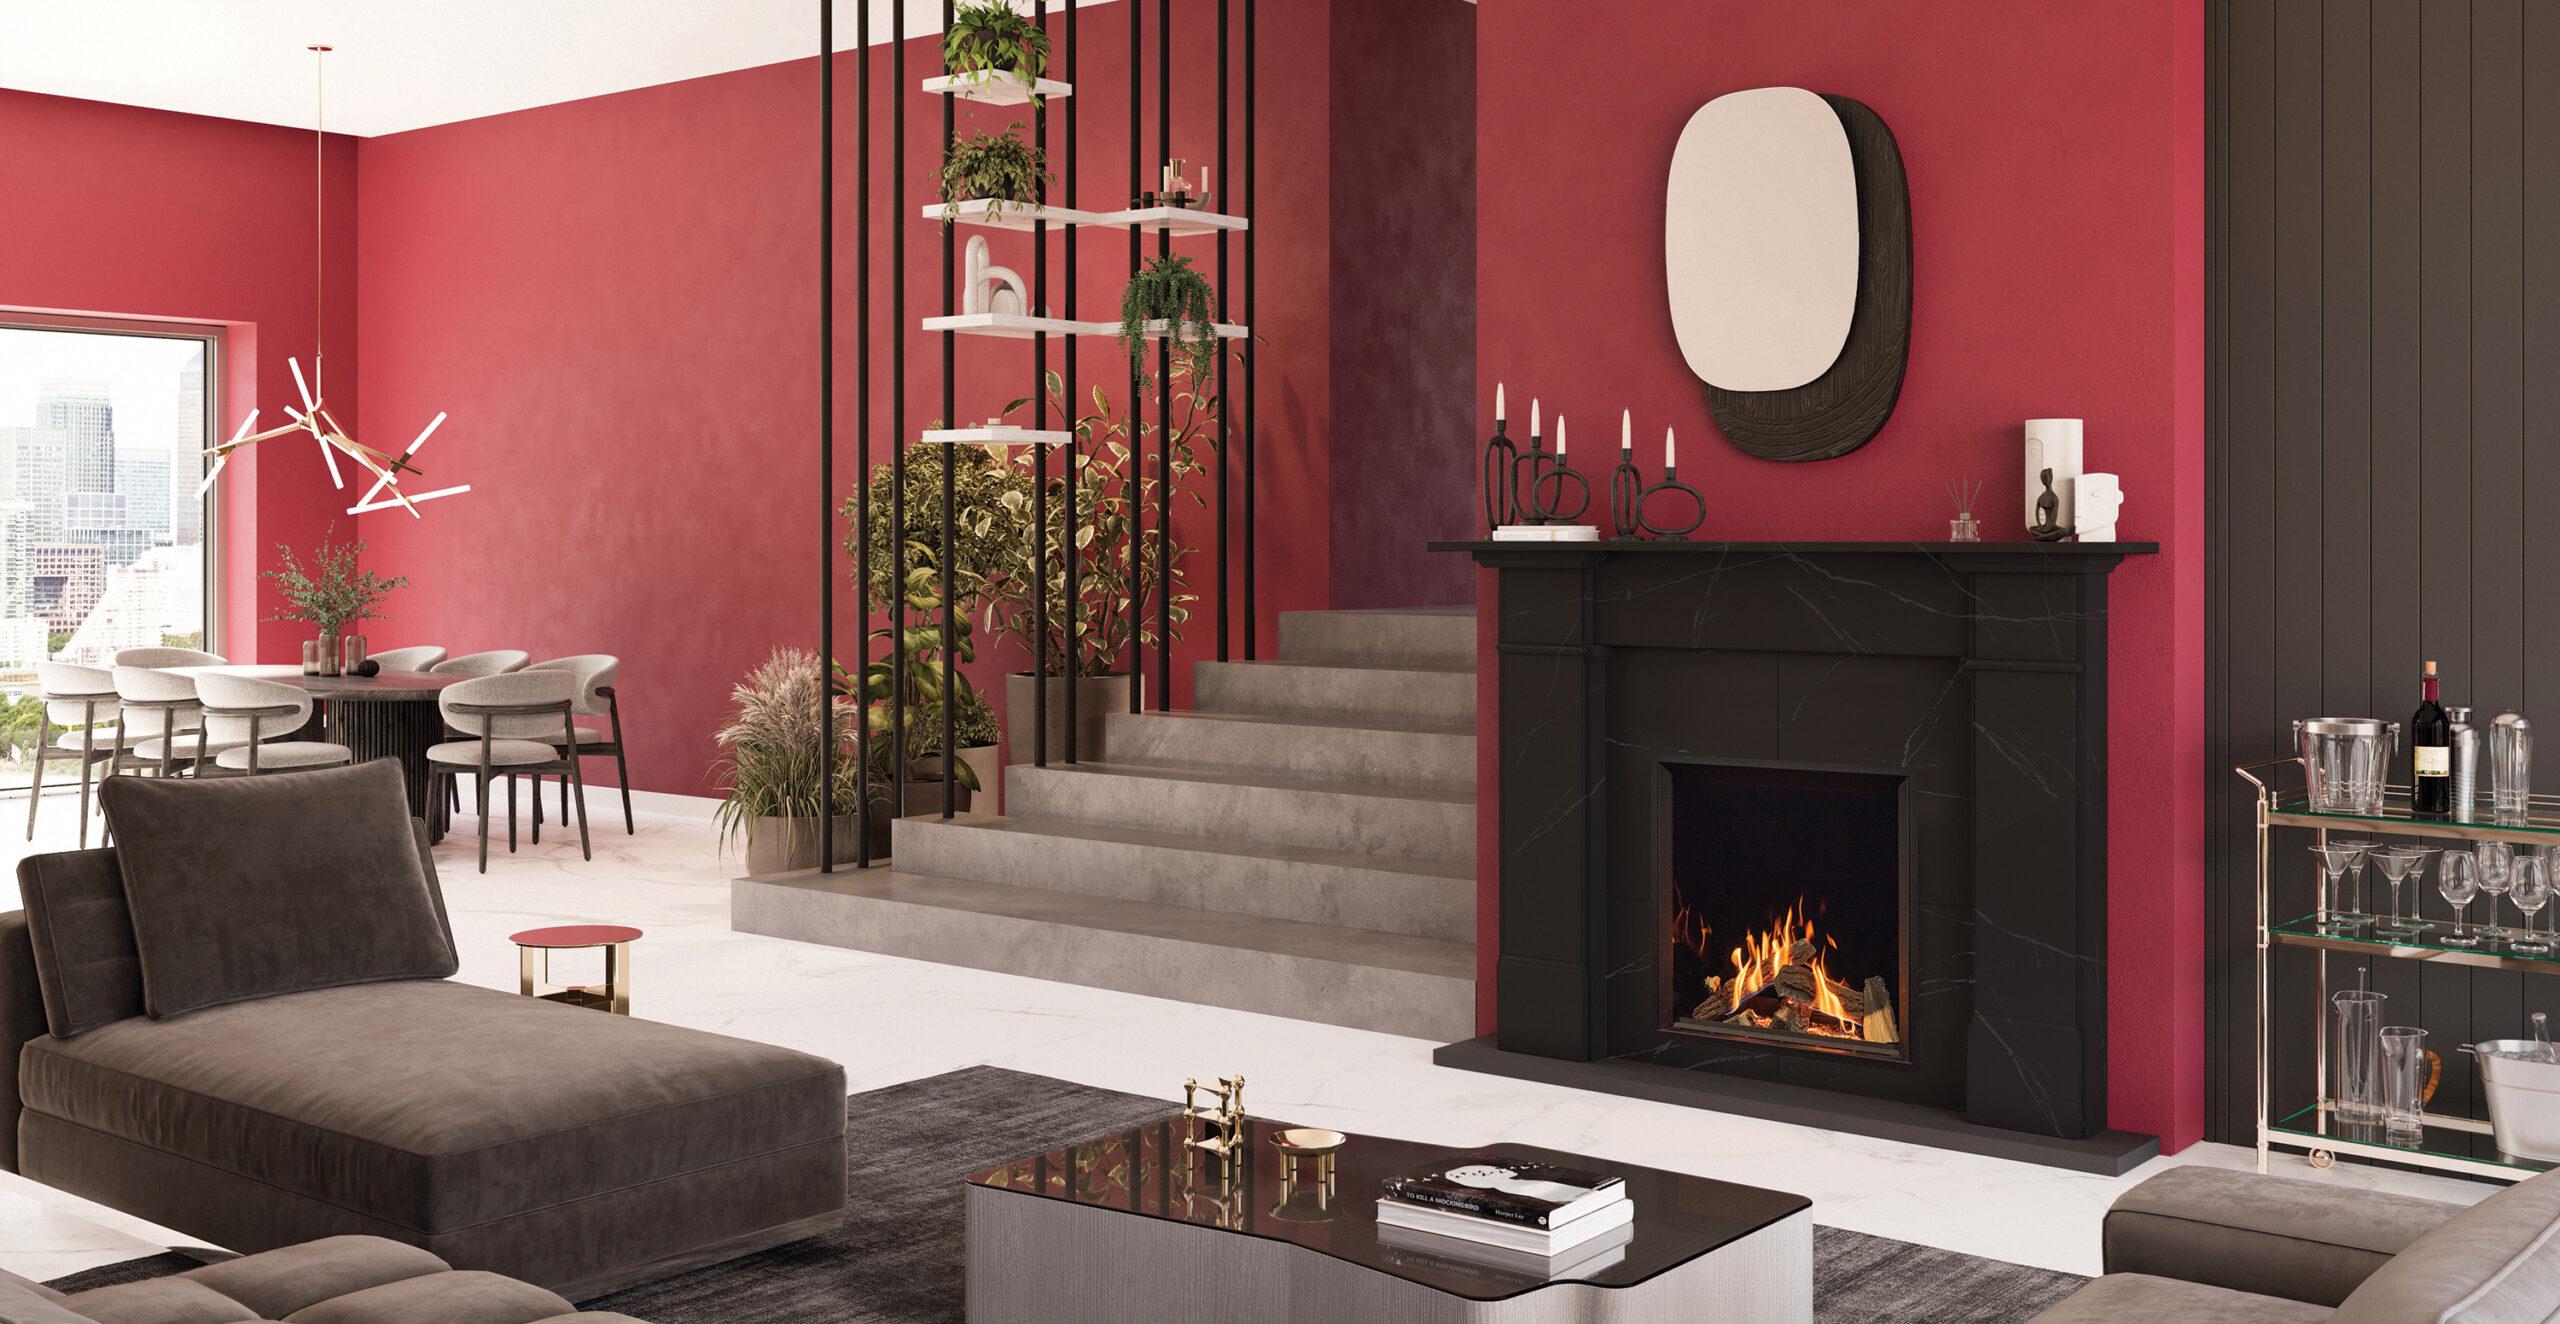 Onyx Eclipse gas fire. Modern fireplace with period influence.